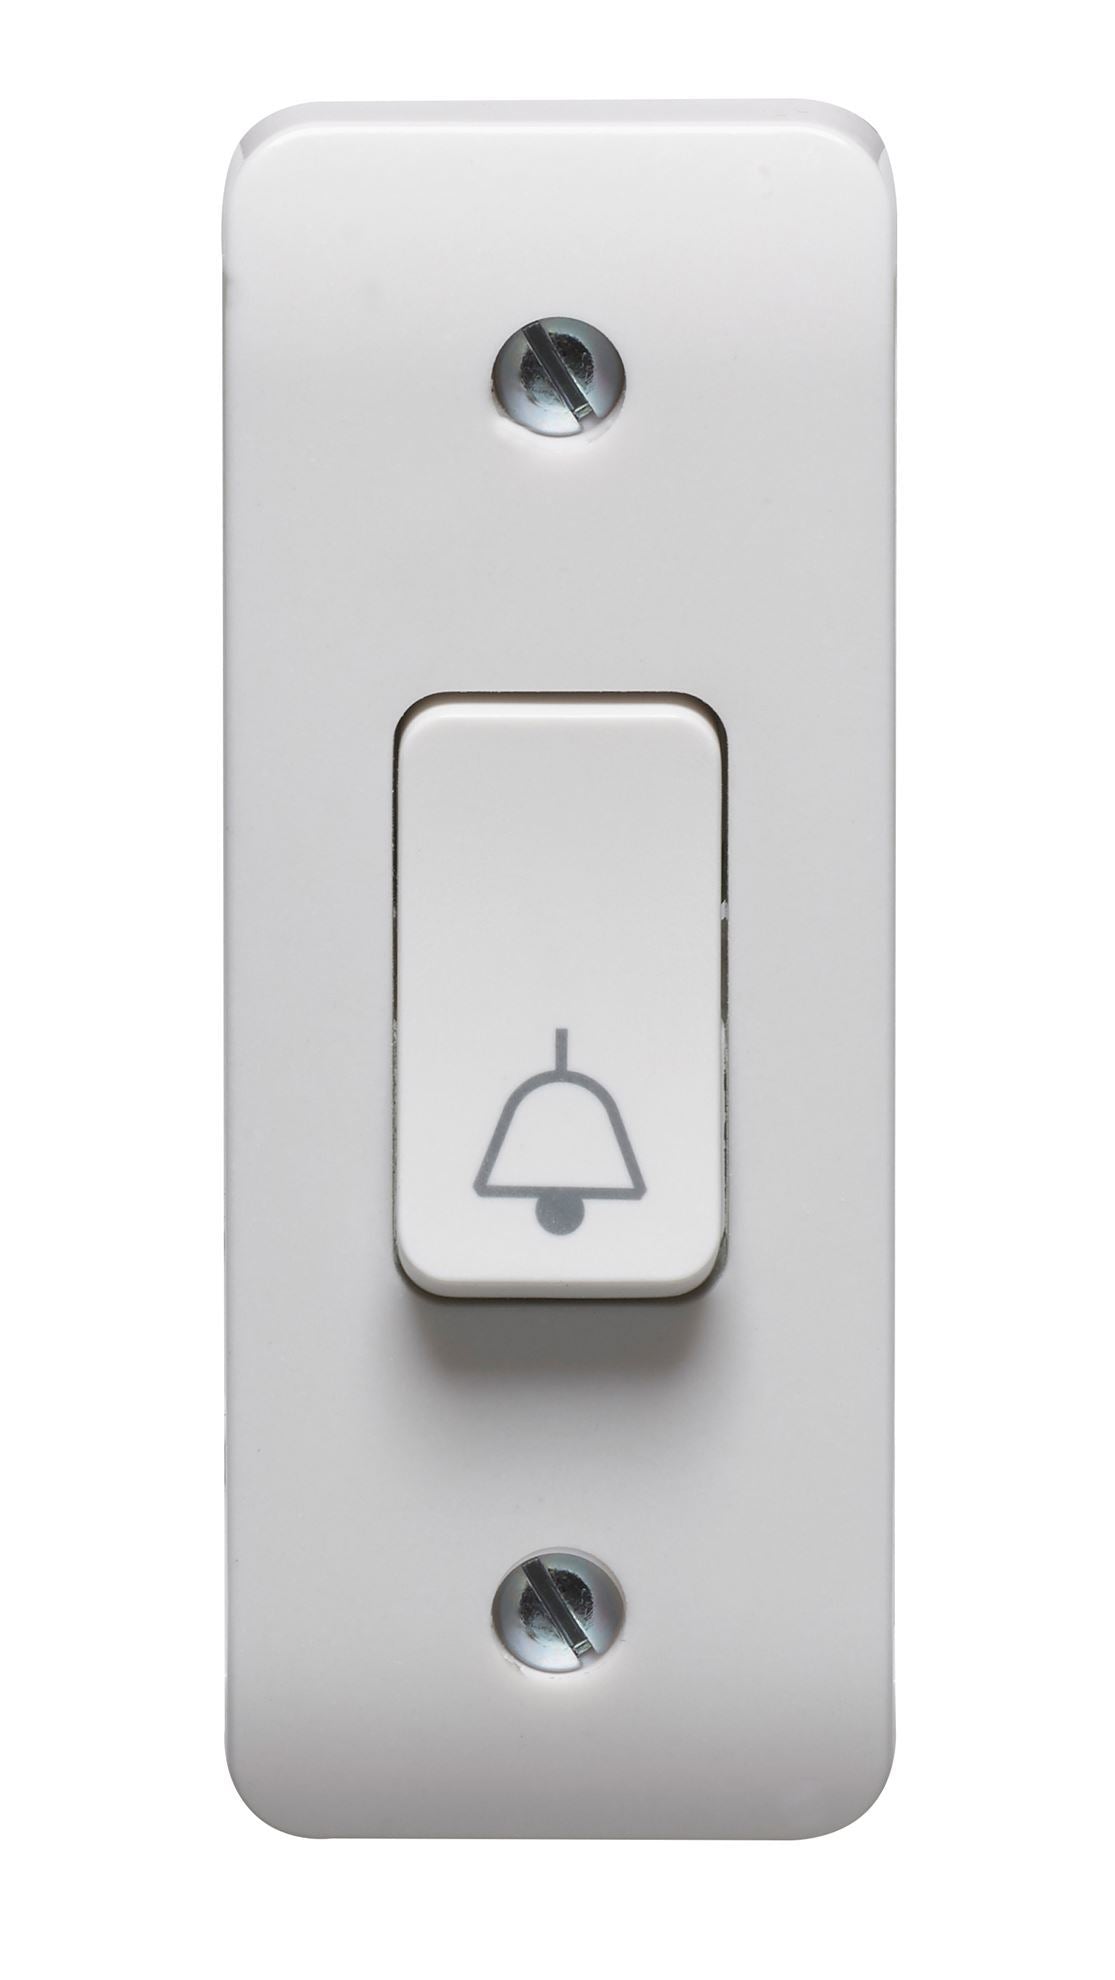 Crabtree Instinct 10A 1G 2 Way Retractive Architrave Switch Printed Bell Symbol Cr1179/Bs